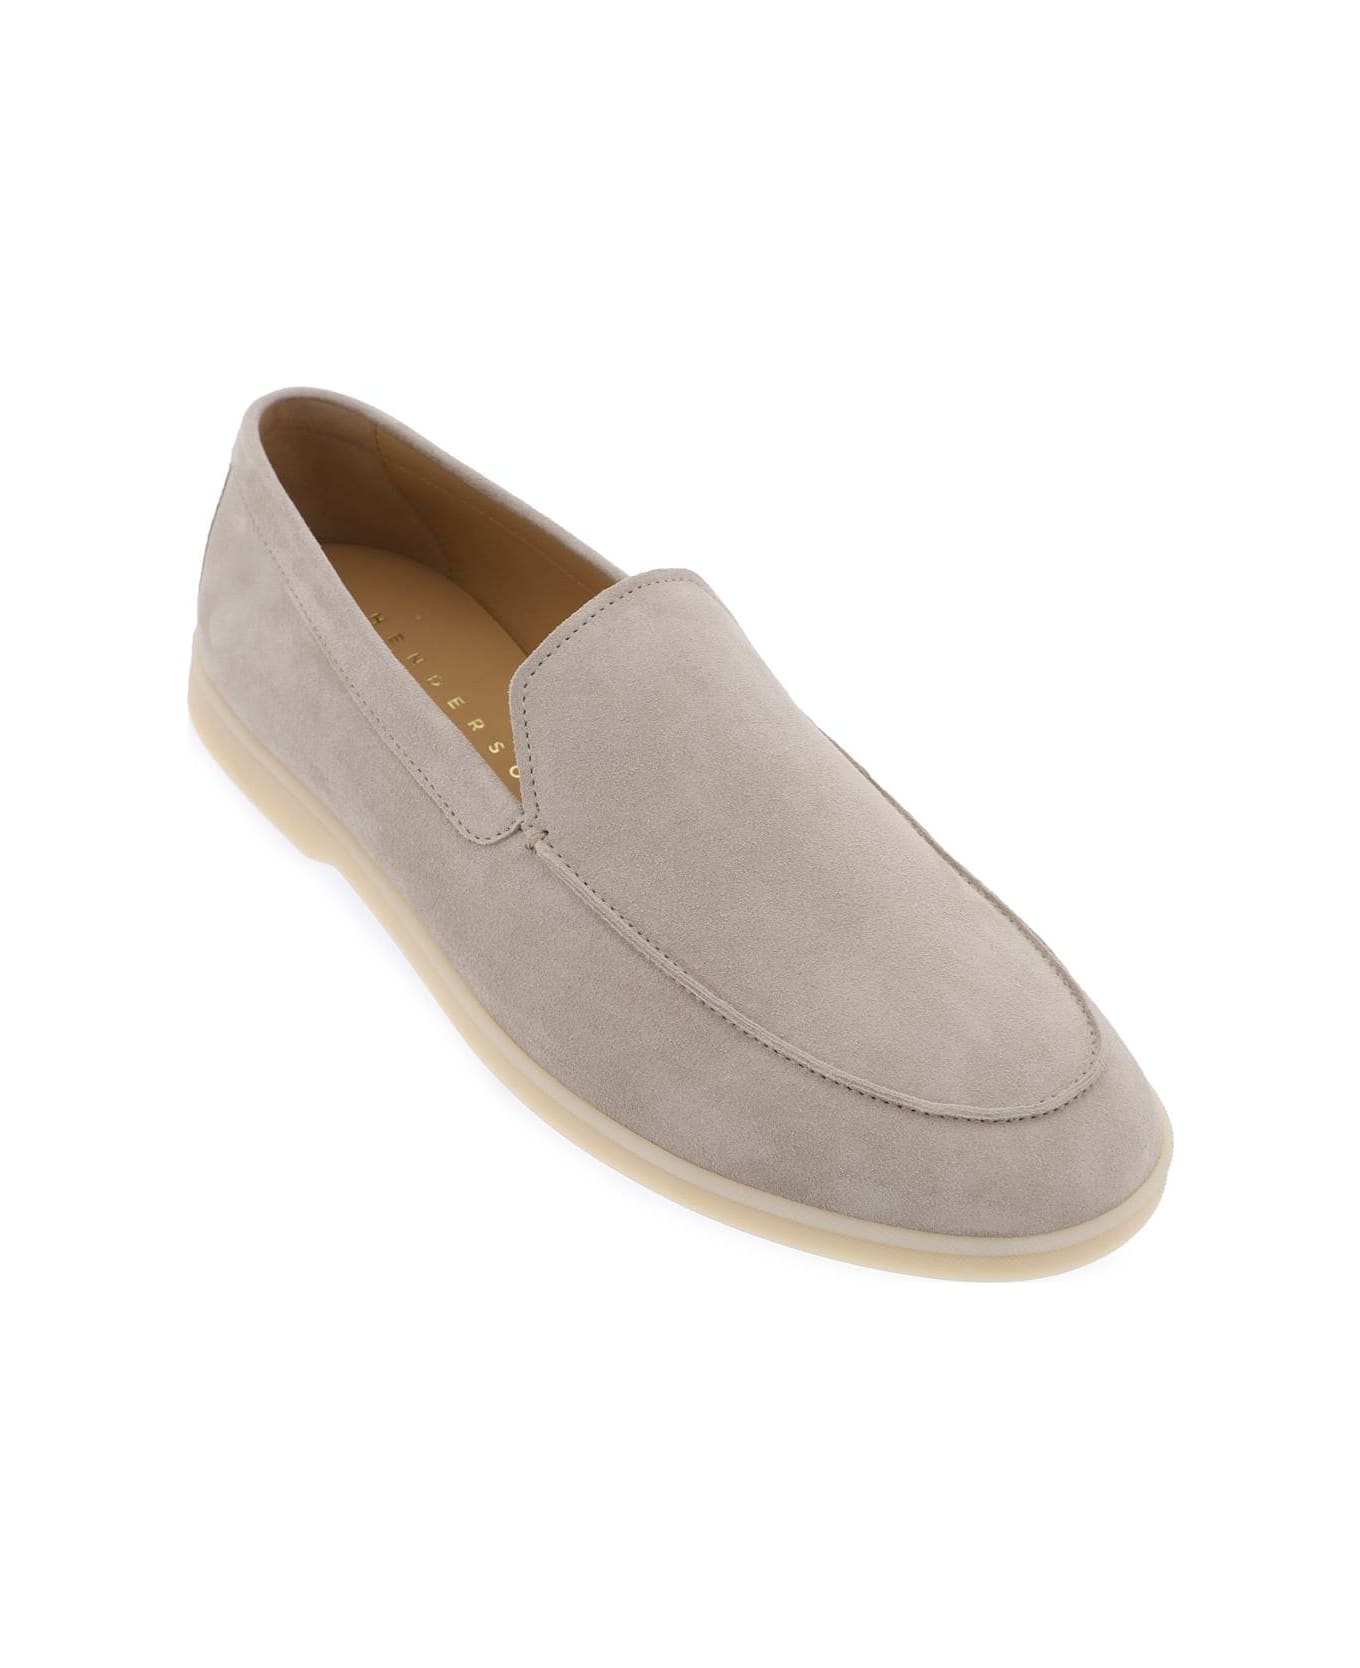 Henderson Baracco Suede Loafers - NEUTRALS